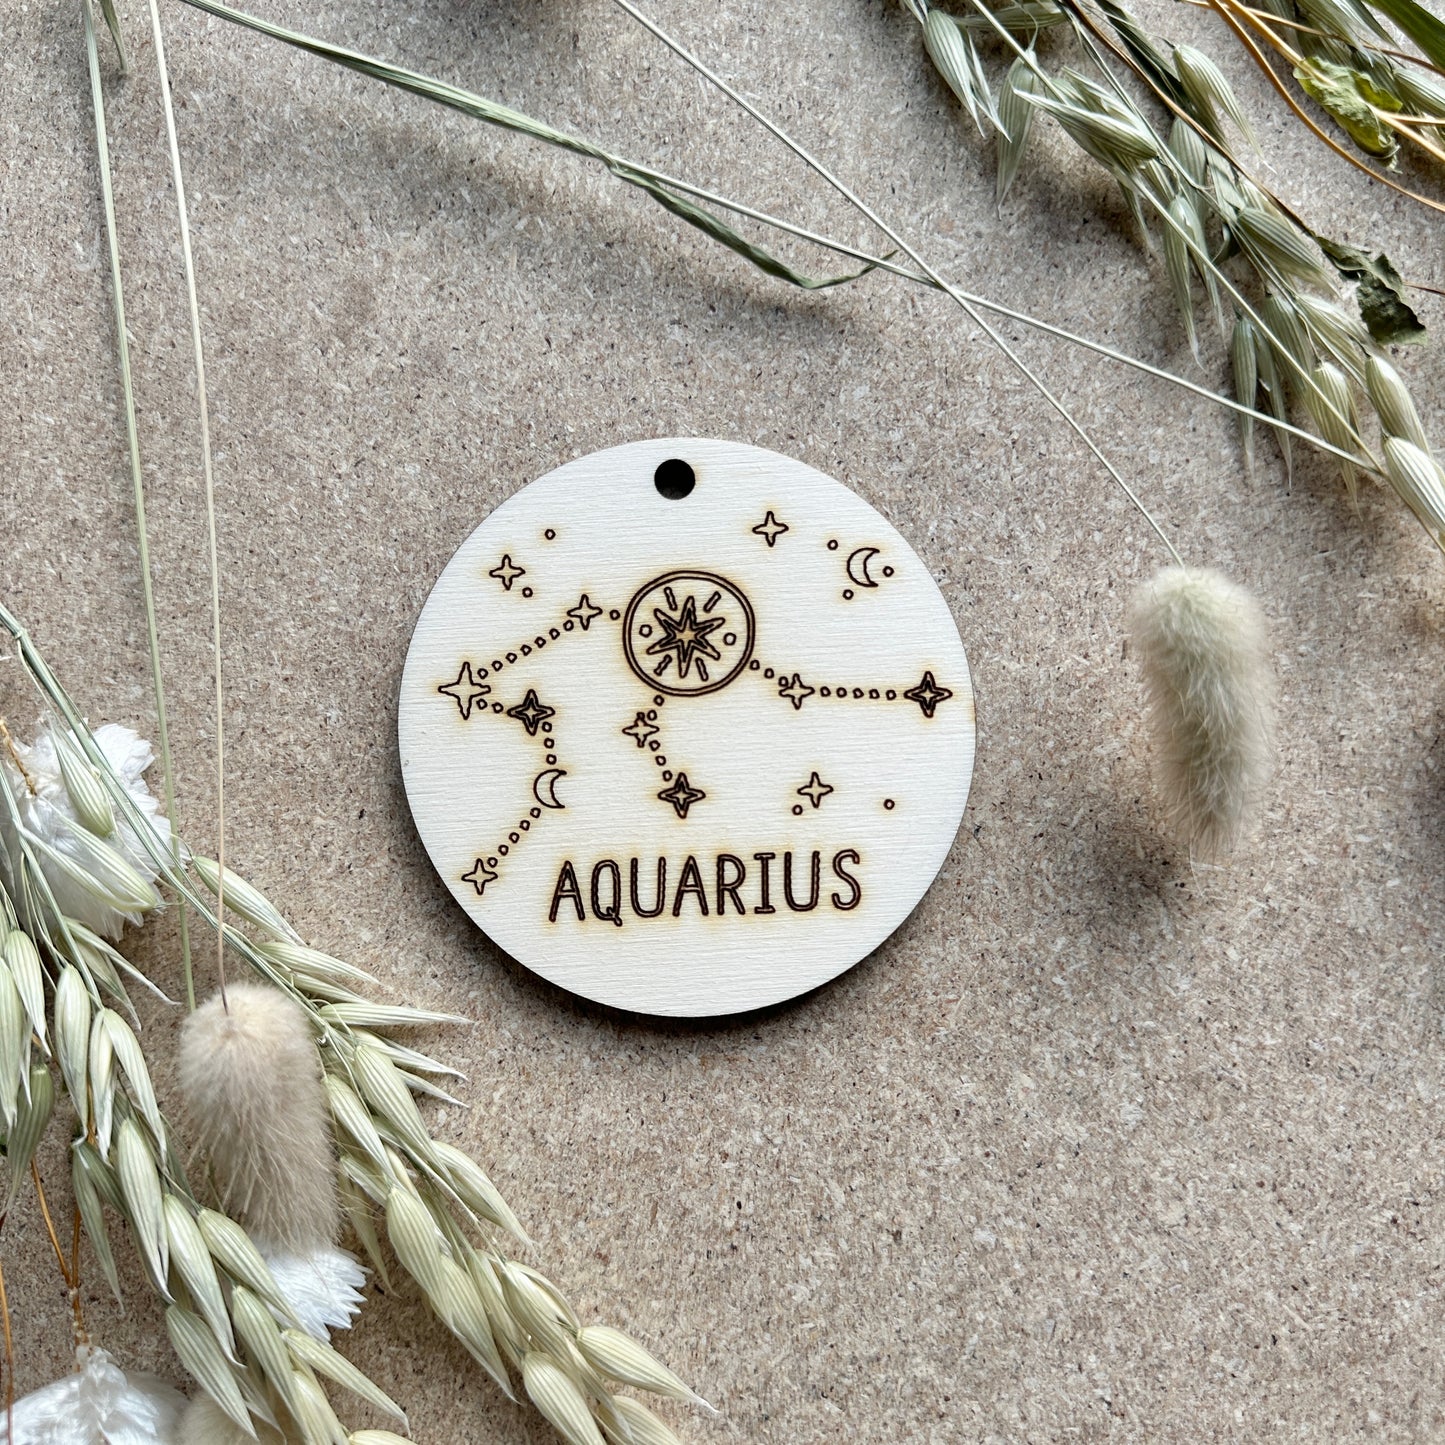 Aquarius Zodiac Star Sign - Wood Star Sign Plaque - Star Sign Constellations - Astrology Gift